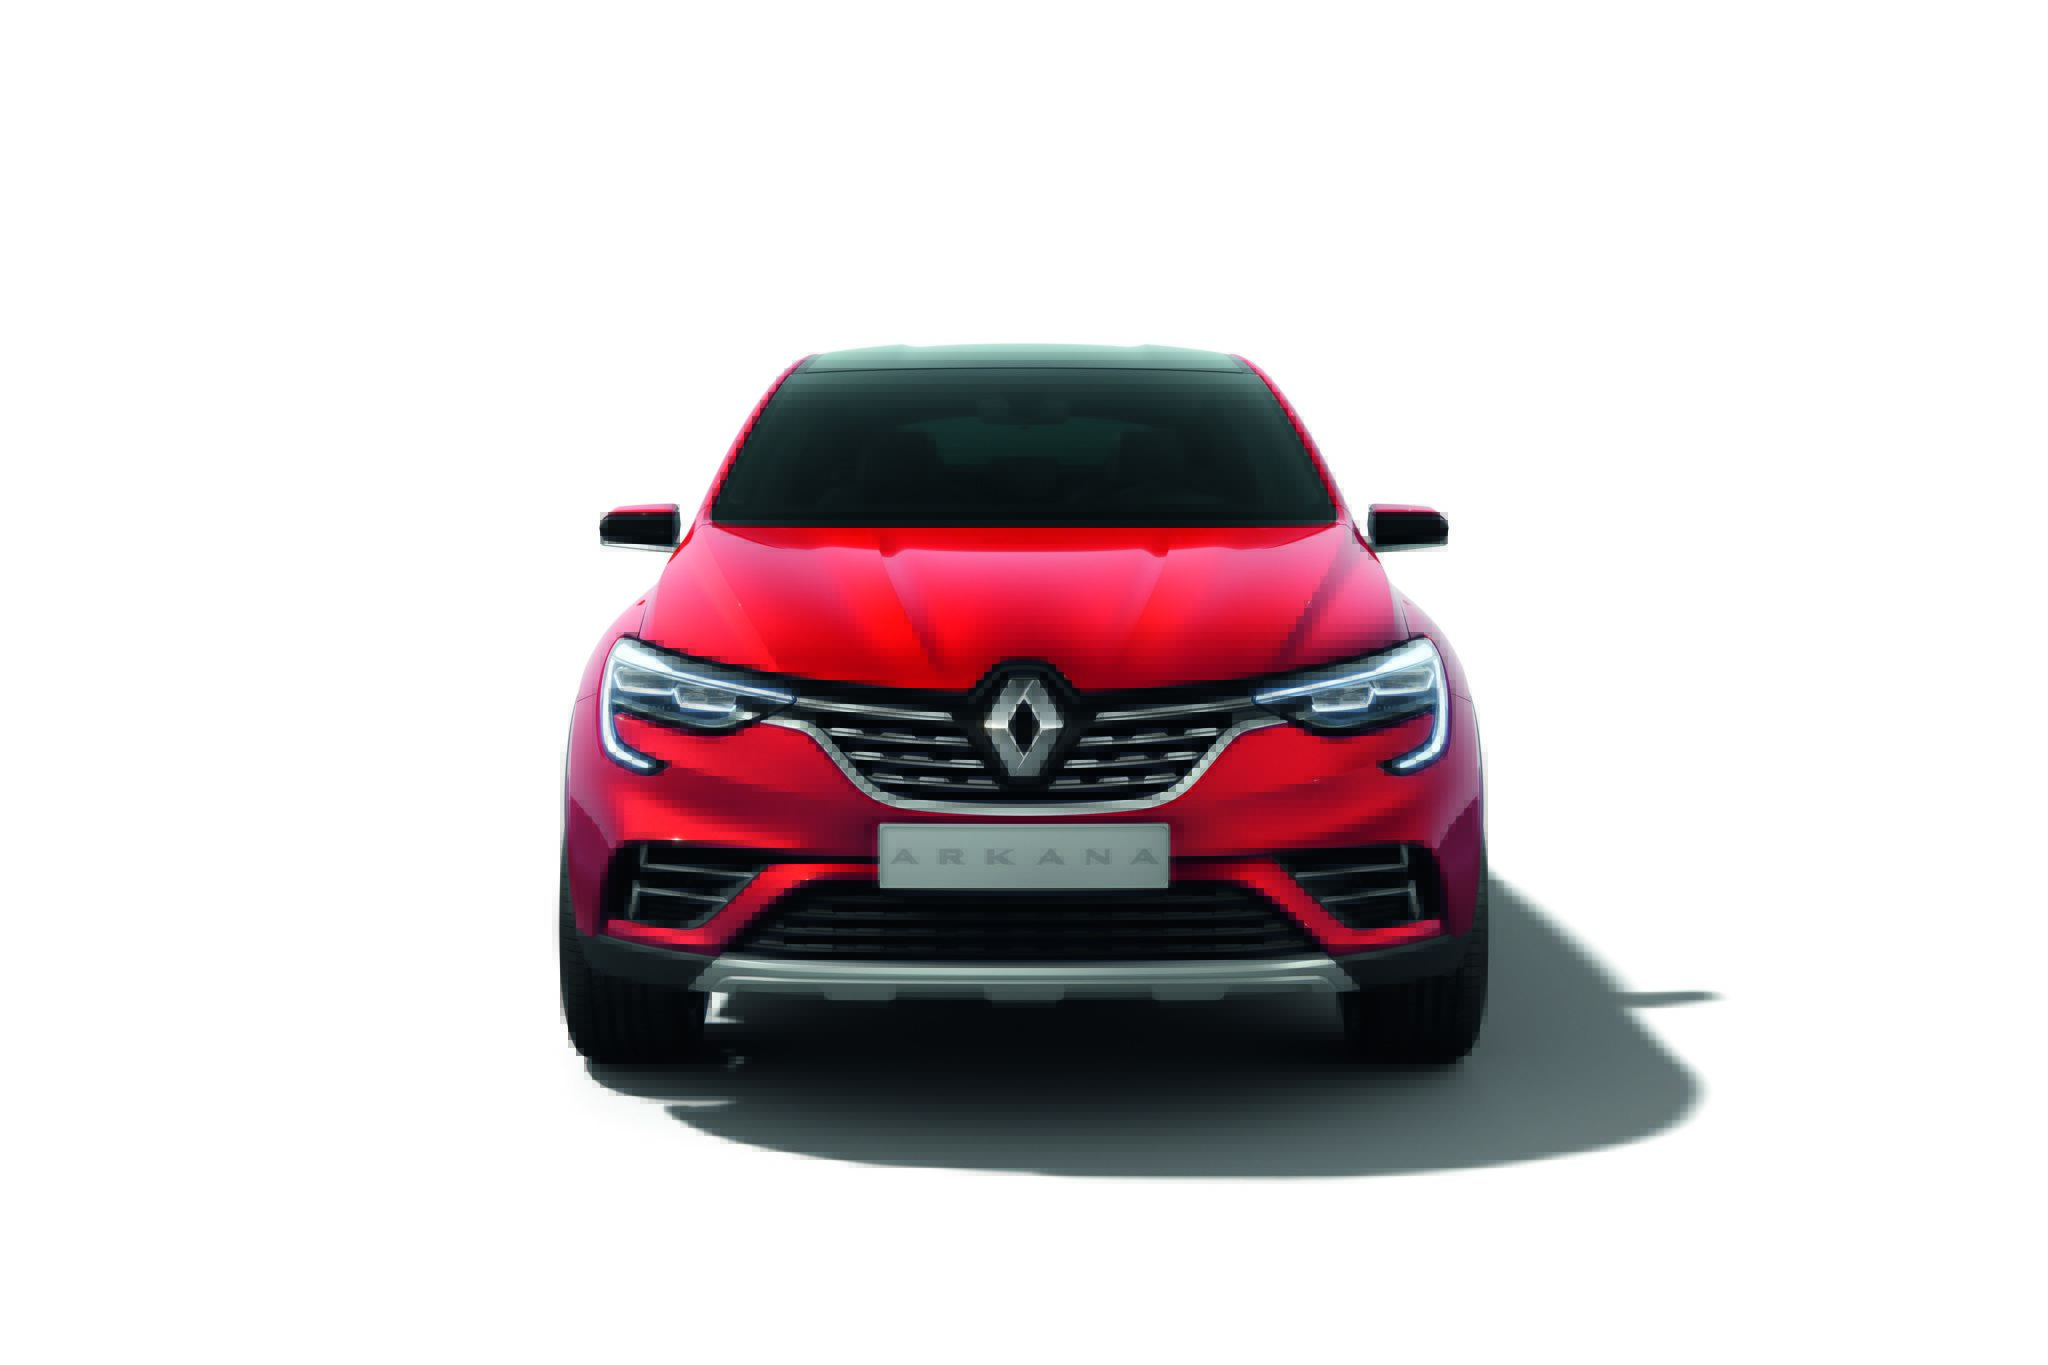 WORLD-PREMIERE-RENAULT-ARKANA-SHOW-CAR-UNVEILED-AT-THE-2018-MOSCOW-INTERNATIONAL-MOTOR-SHOW-Emargo-07.55-BST-29-Aug-f.jpg